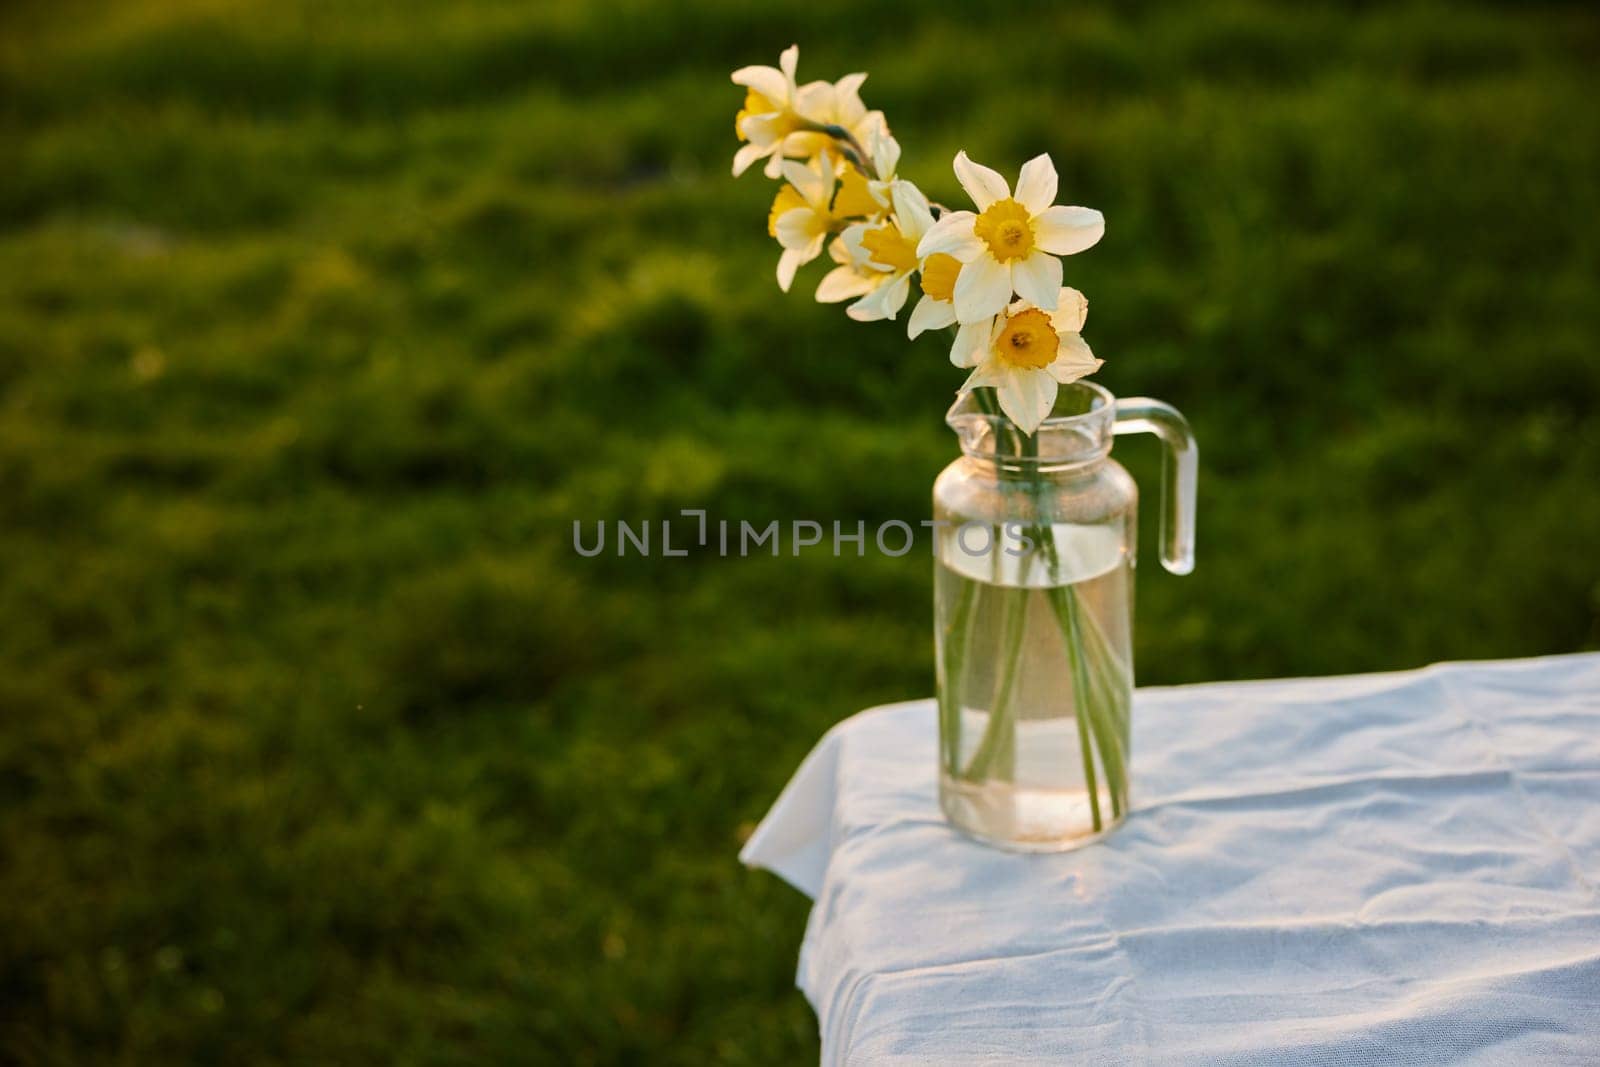 aesthetic photograph of daffodil bouquets standing on a street table. High quality photo